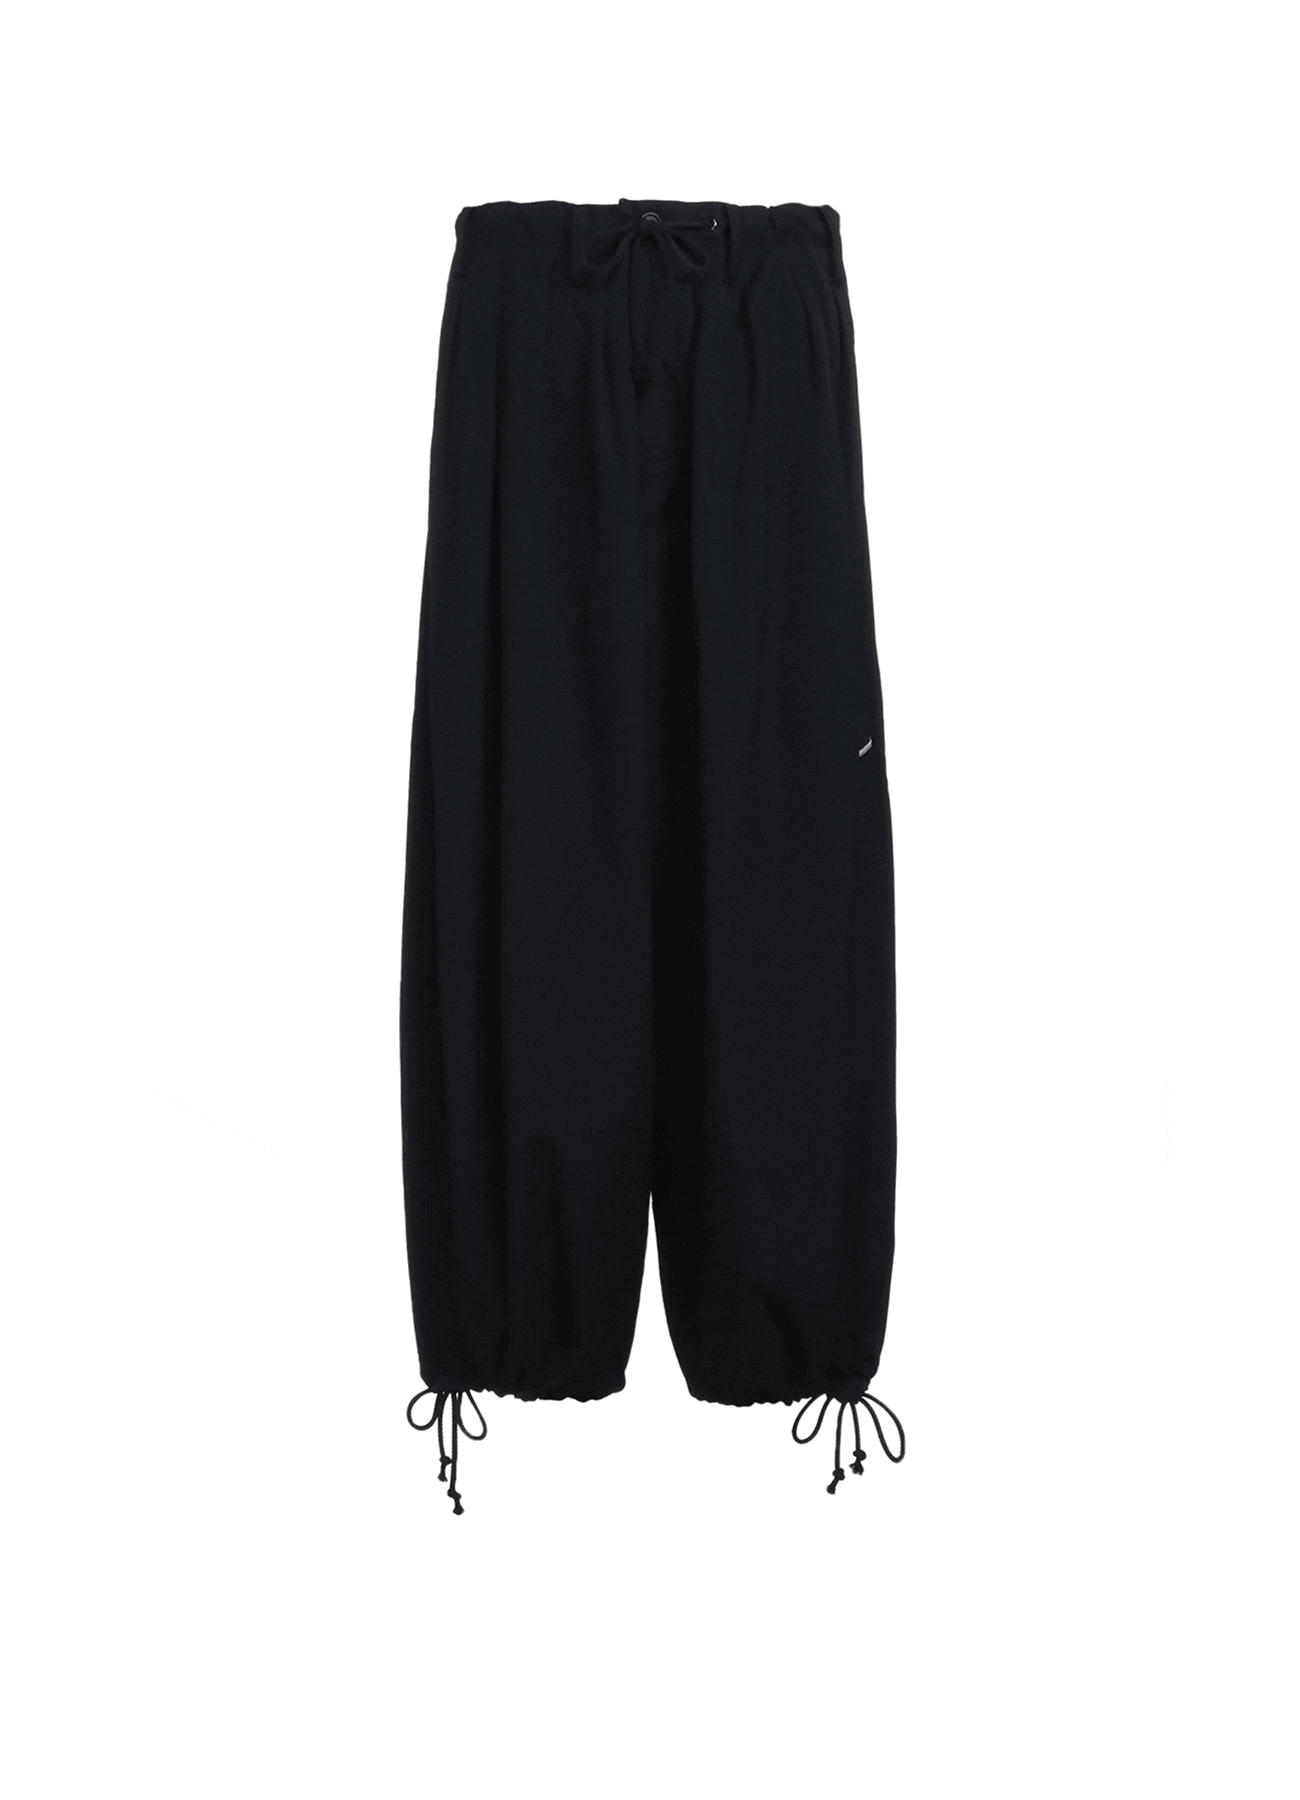 WASHER FINISHED WOOL GABARDINE BALLOON PANTS WITH ZIPPER POCKETS